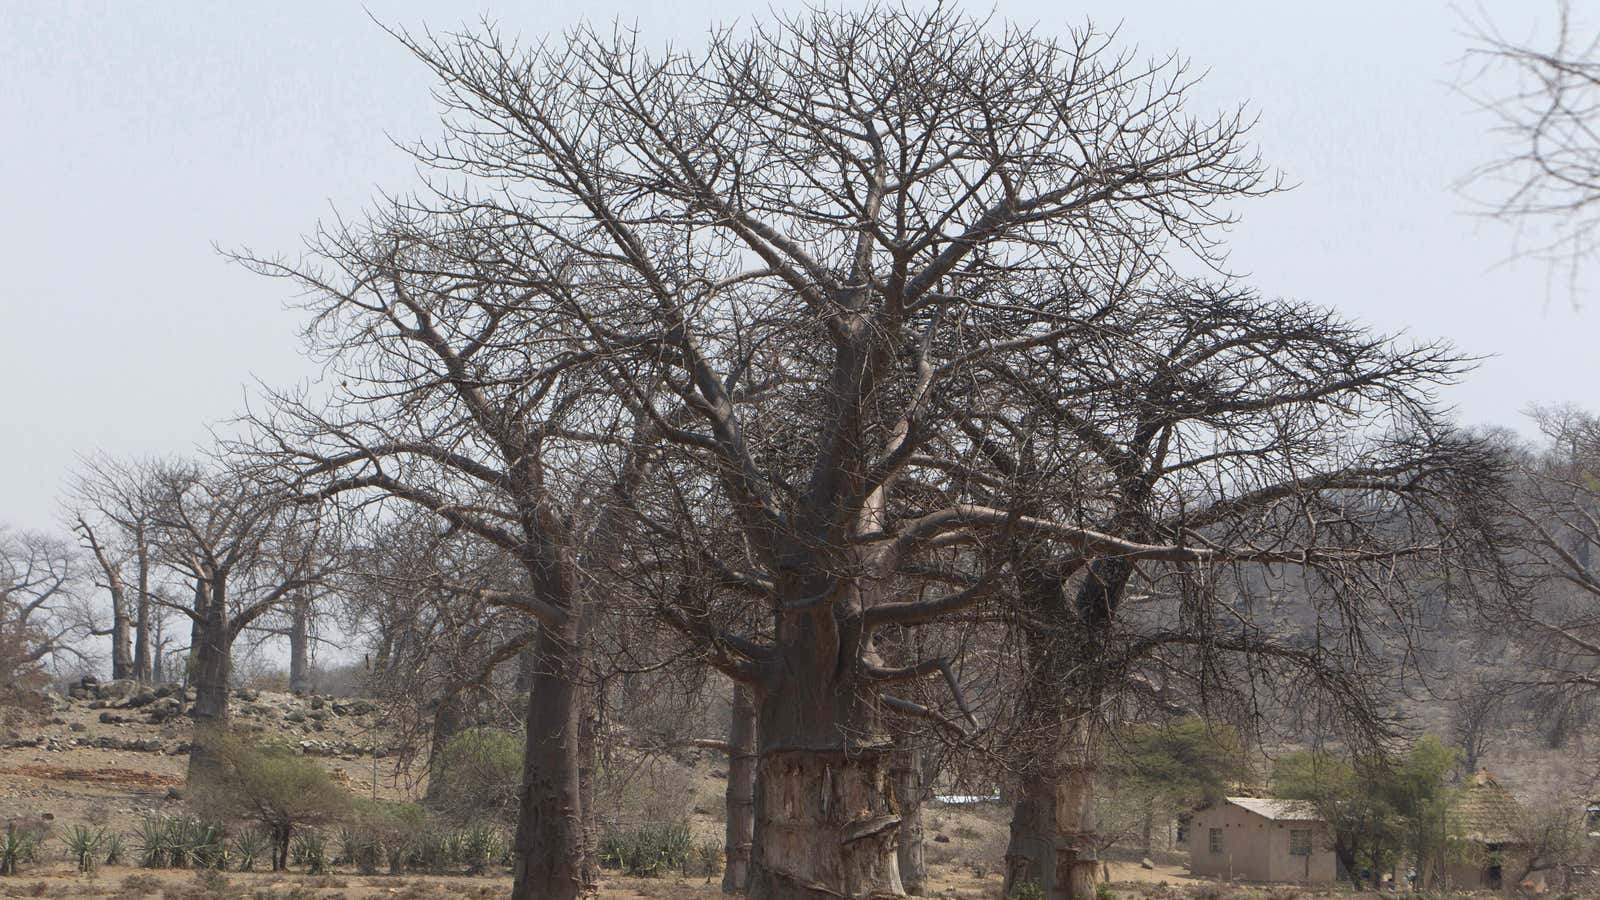 Baobabs live so long it will be difficult to know if they do go extinct